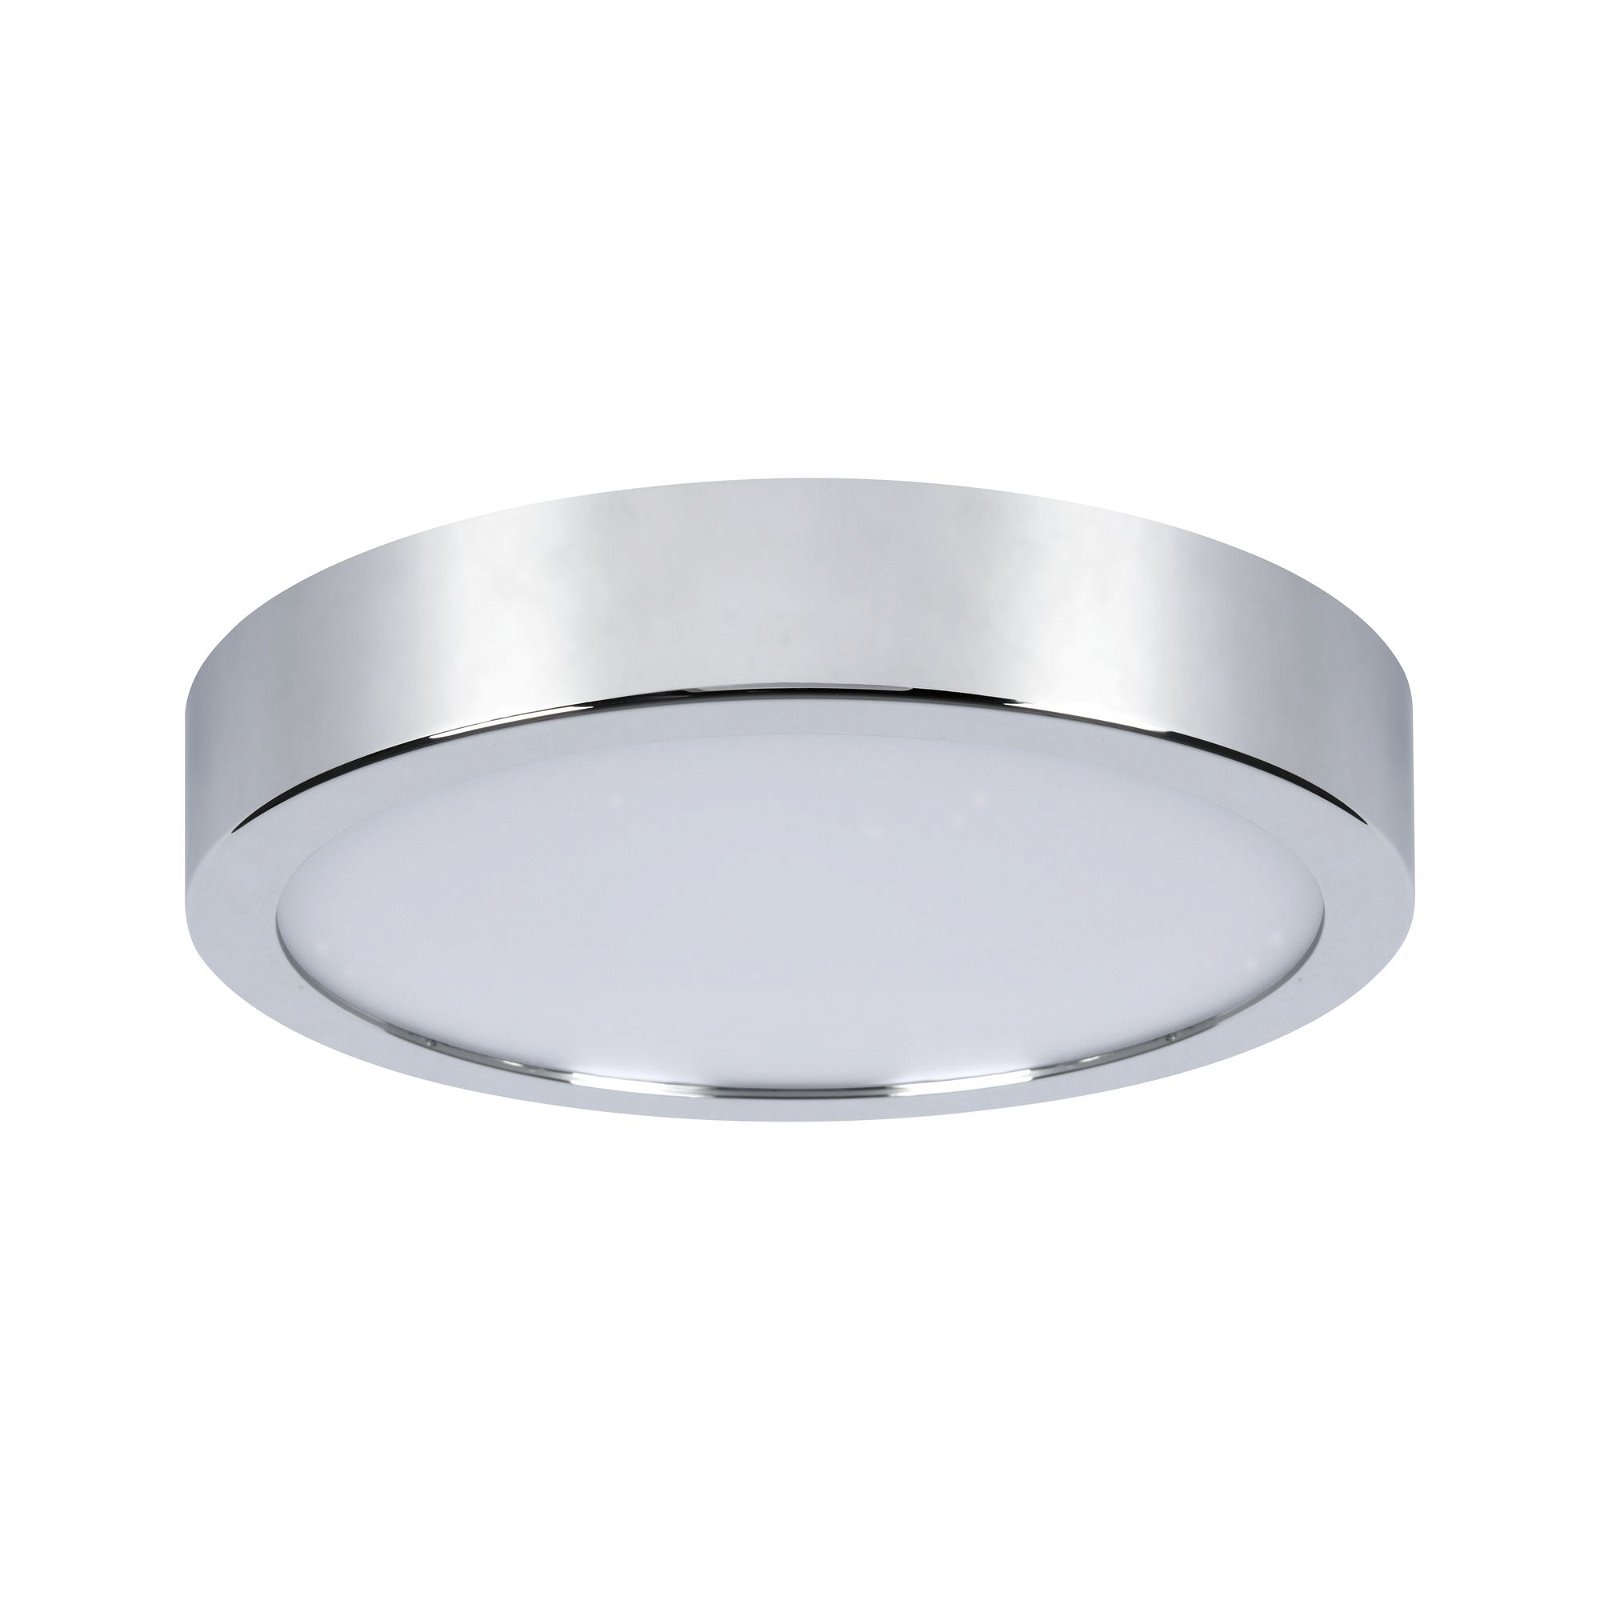 LED Panel Aviar IP44 round 220mm 13W 950lm 3000K Chrome dimmable